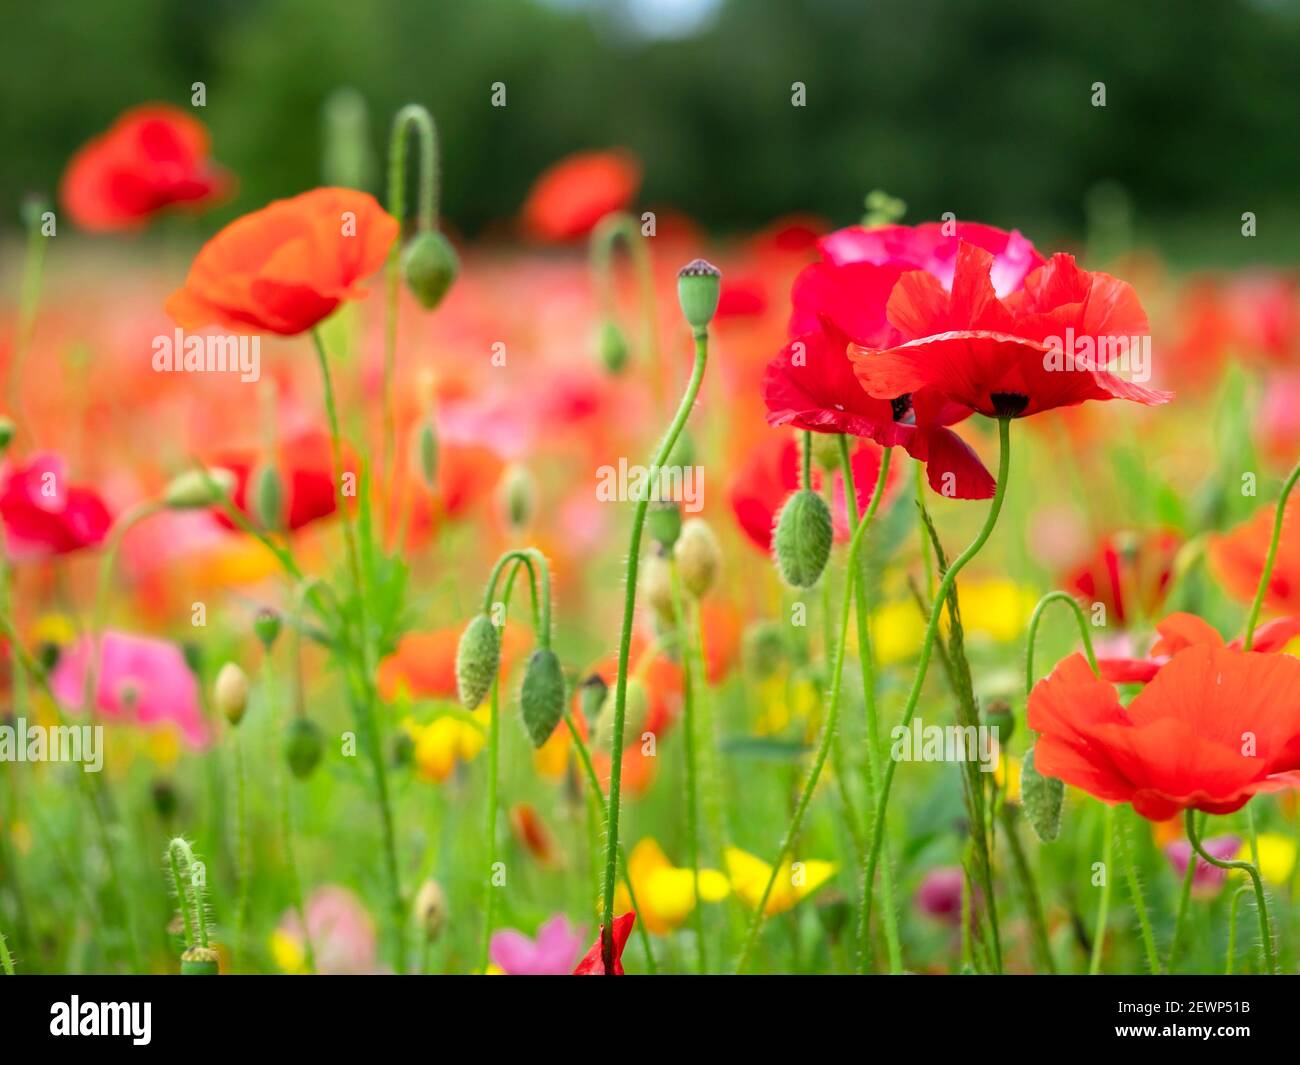 Closeup of mixed poppies with buds and seed pods in a summer garden Stock Photo